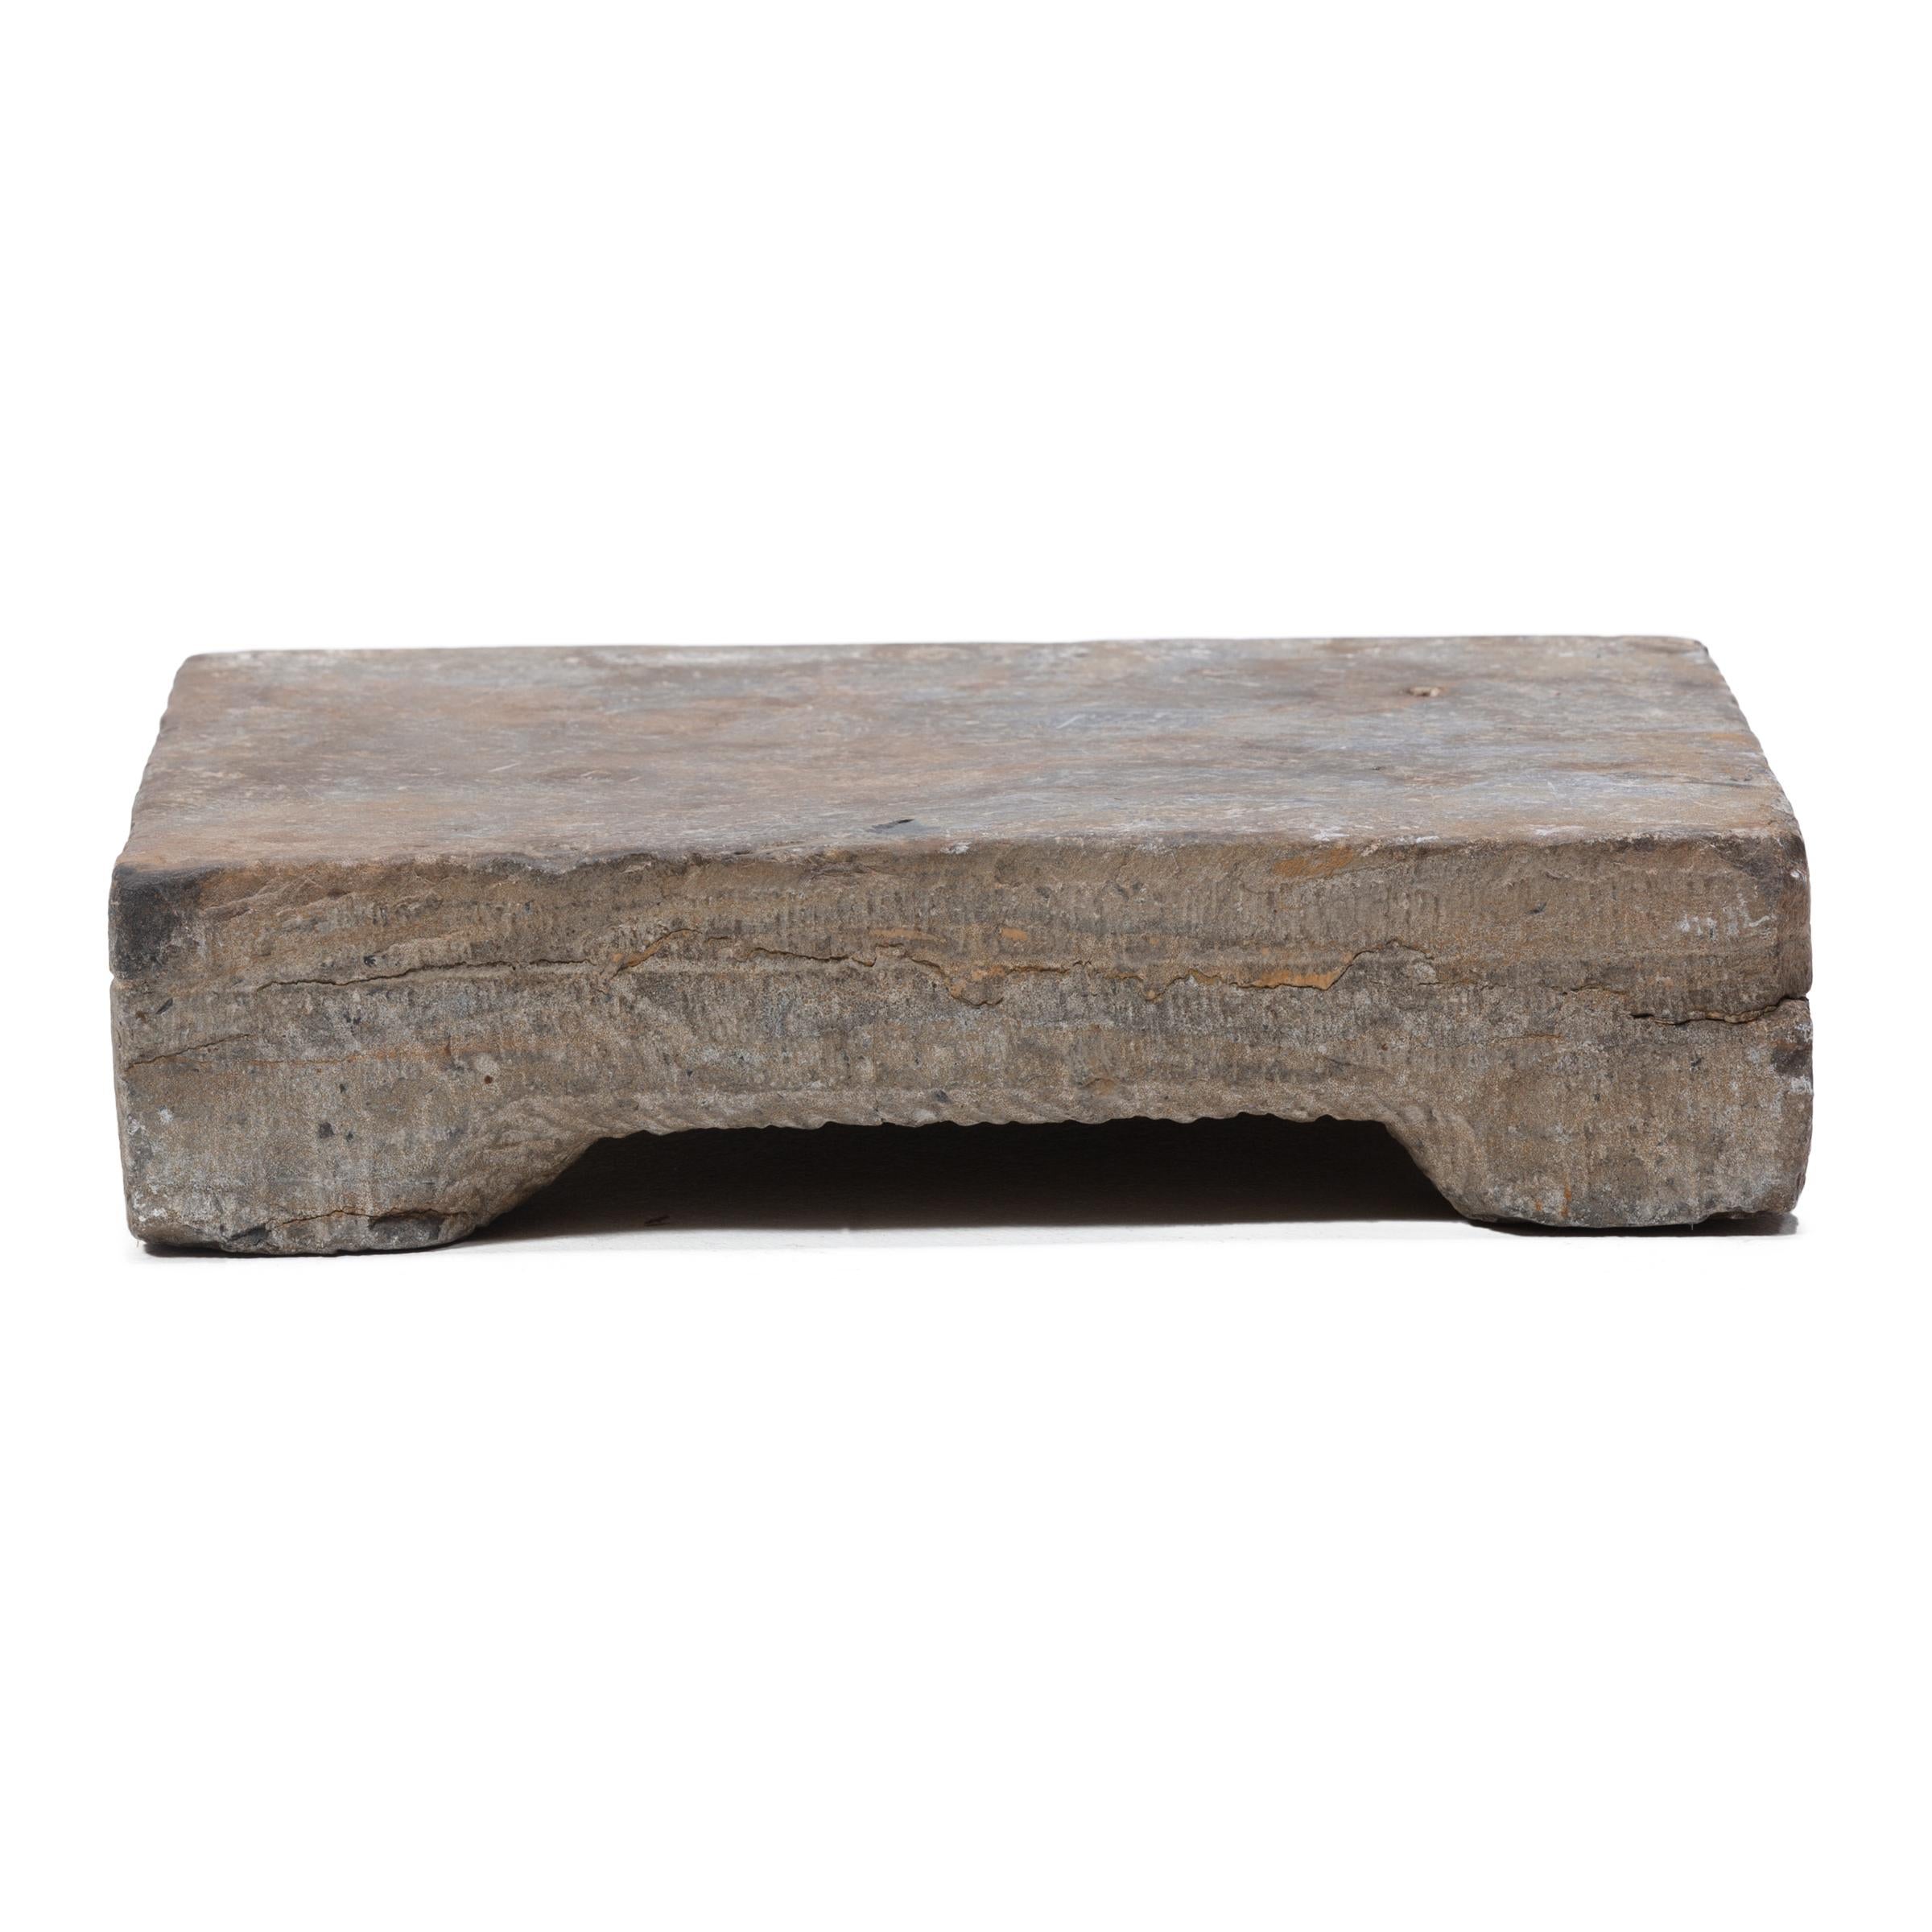 Carved in the late 19th century in northern China, this limestone washing stone would have been used by a Qing-dynasty woman for washing clothes and textiles. Used by beating wet fabrics against its smooth surface with a wooden washing stick,